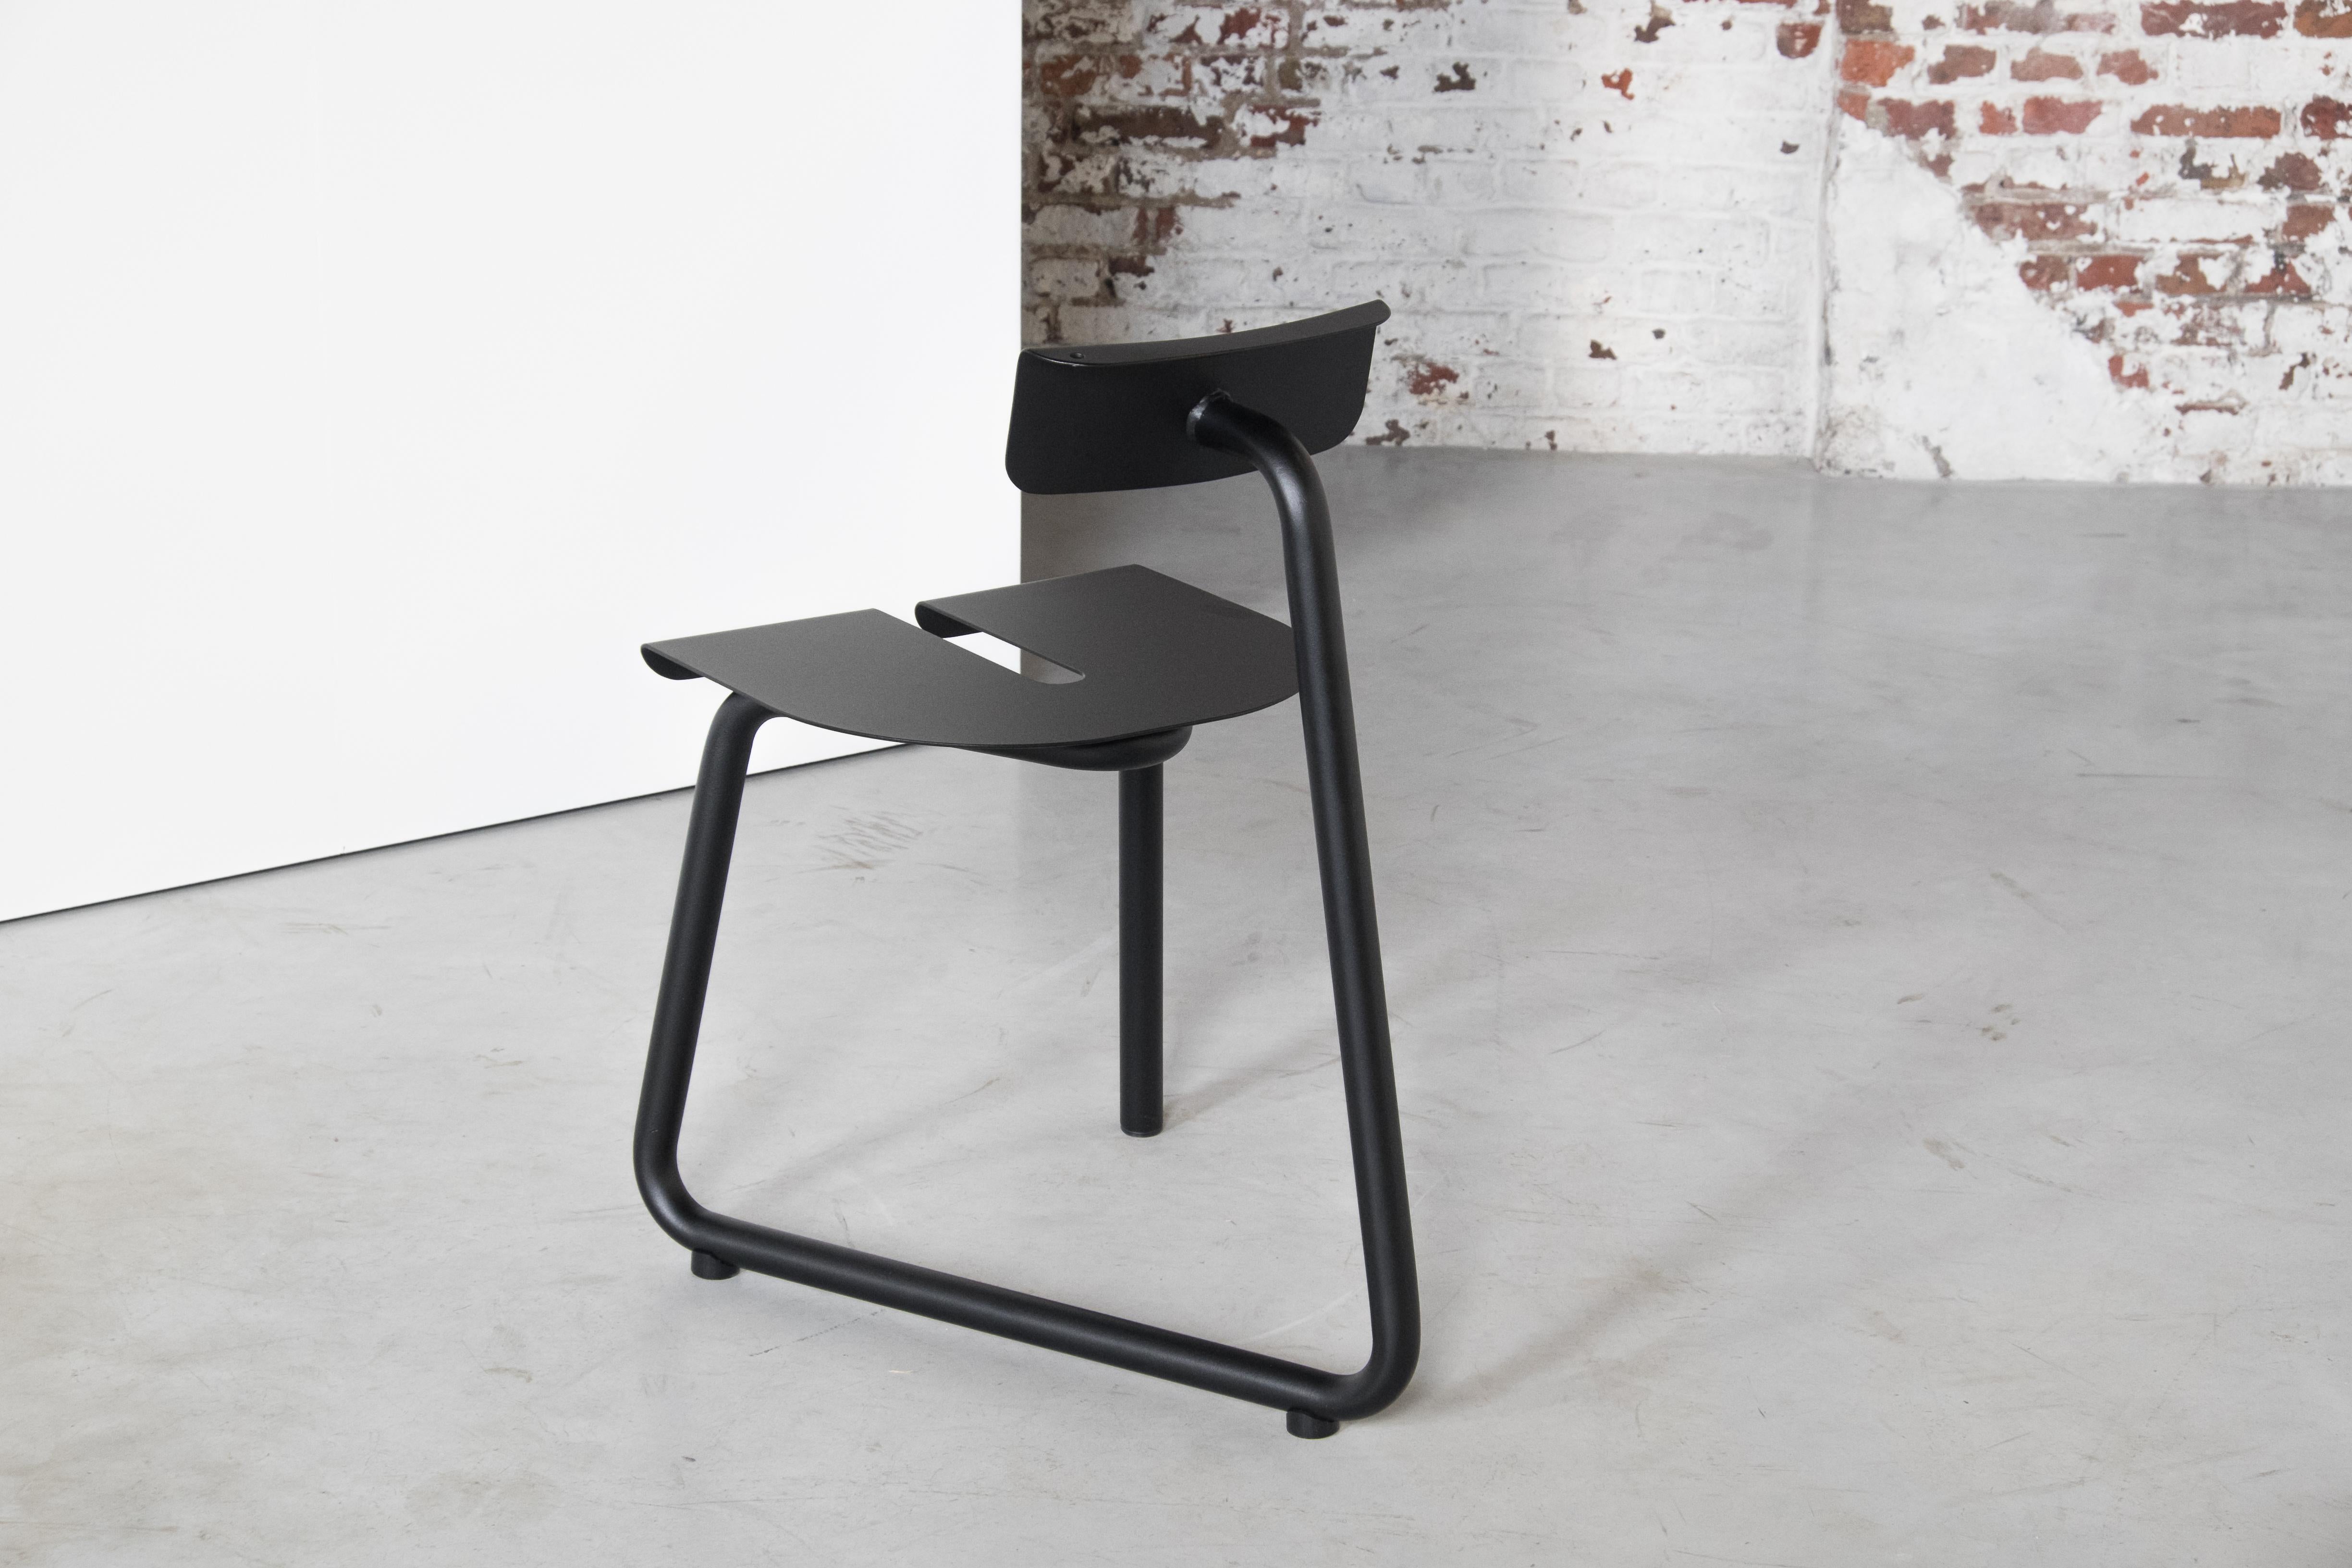 SPC Black Chair by Atelier Thomas Serruys
Dimensions: D65 x W43 x H46
Materials: Steel, Powder Coated

Steel chair made of one shaped tube with sheet steel seat and backrest. Powdercoated, Ertalon footrests. 

Perfect for outdoor use, no